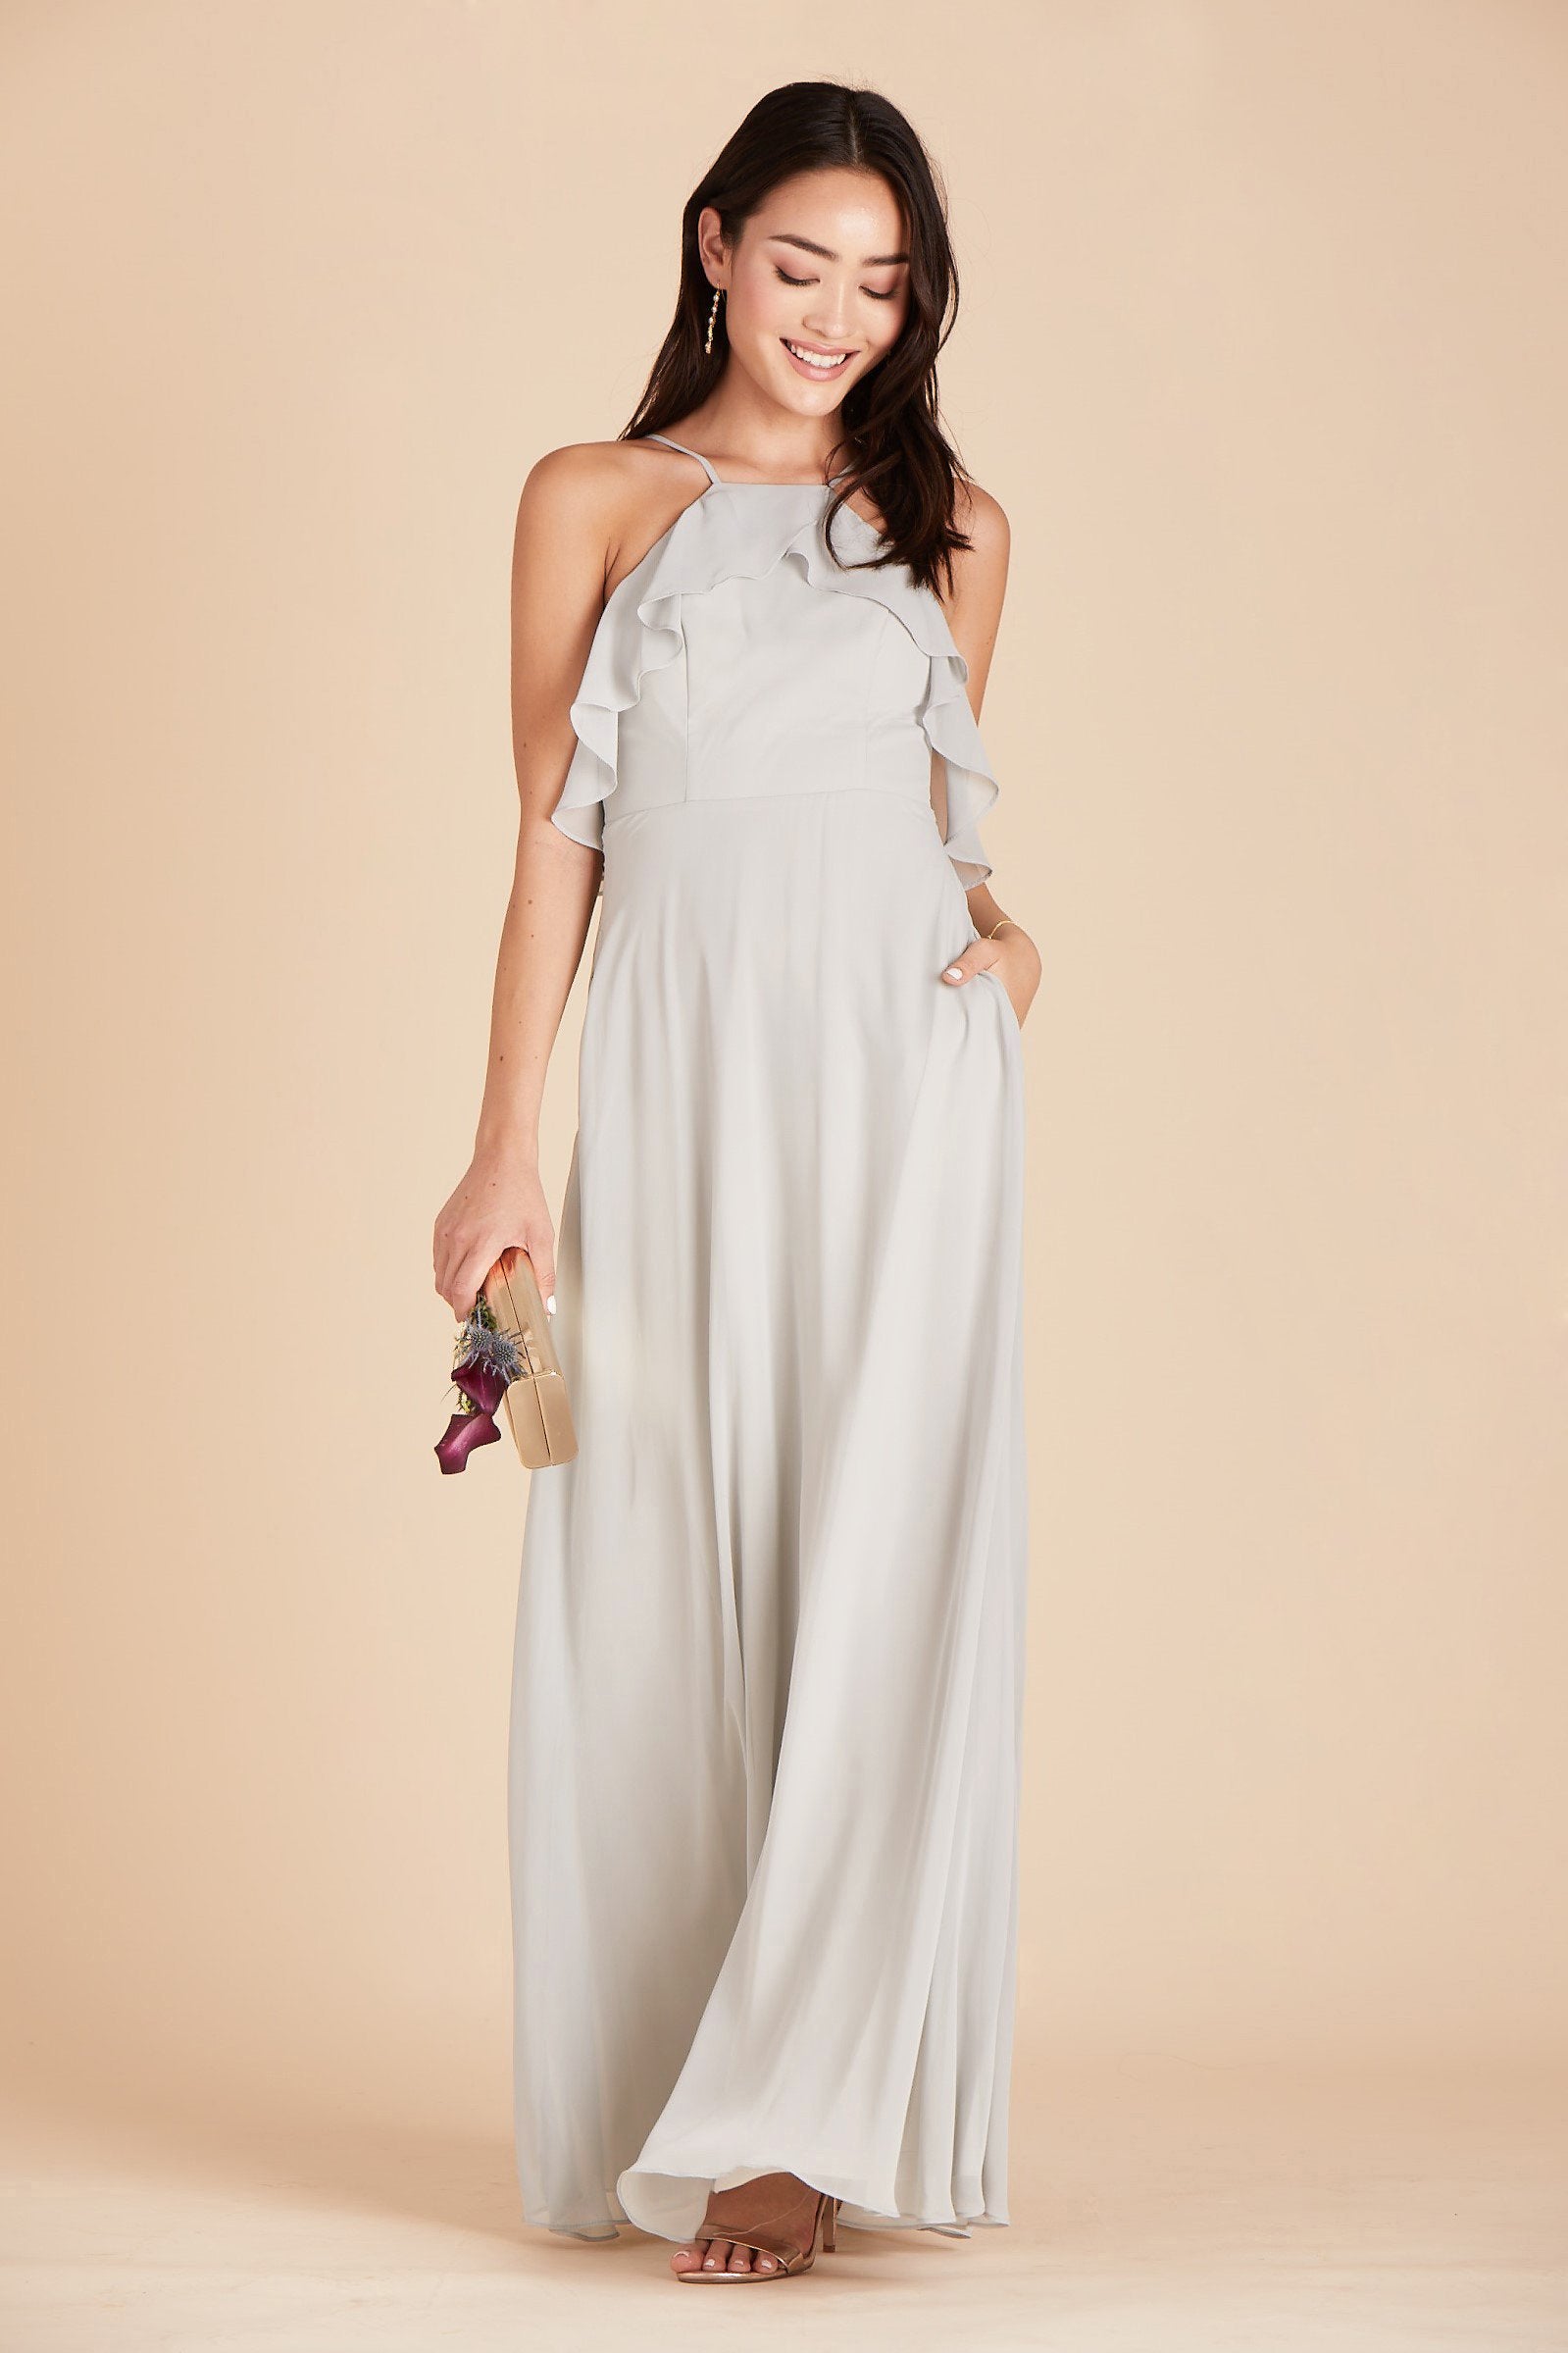 Jules bridesmaid dress in dove gray chiffon by Birdy Grey, front view with hand in pocket